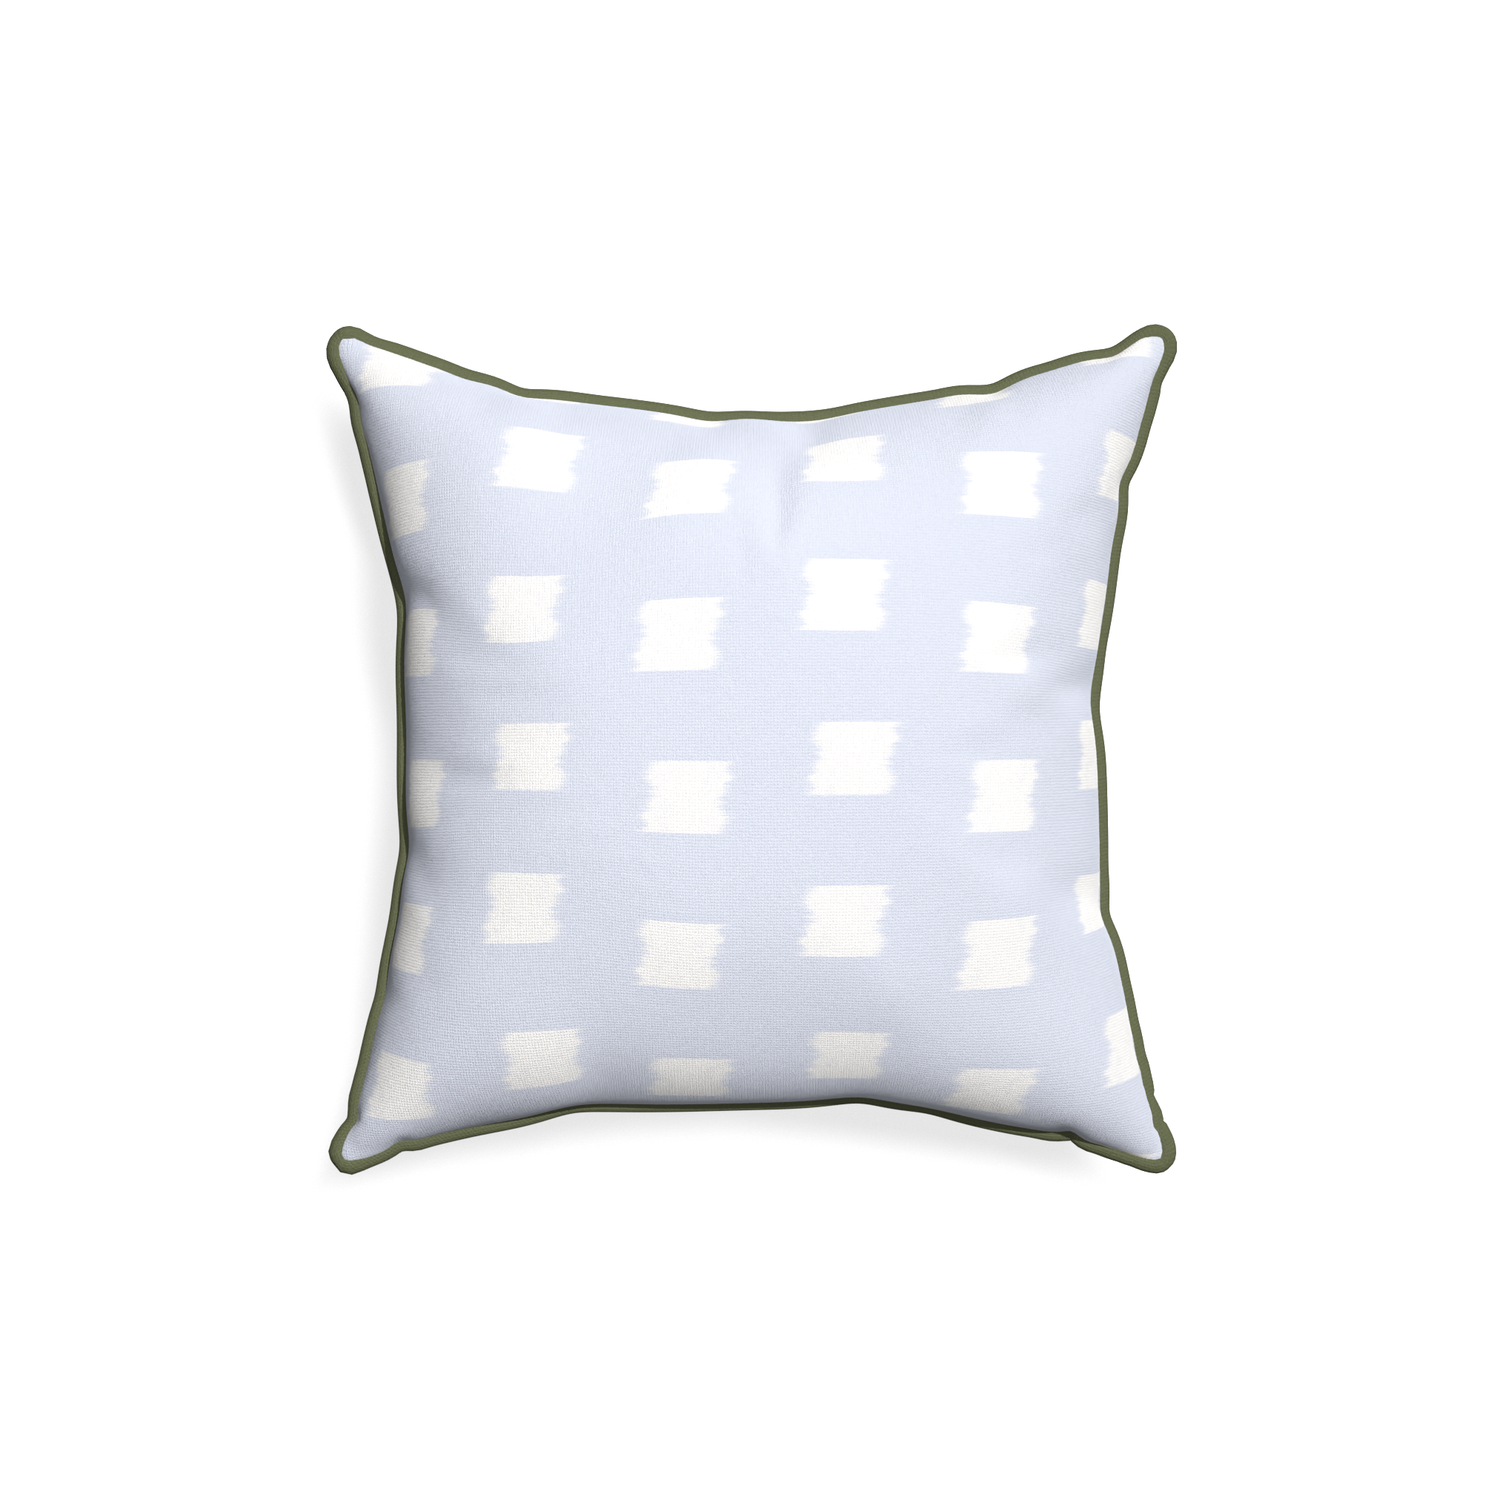 18-square denton custom pillow with f piping on white background